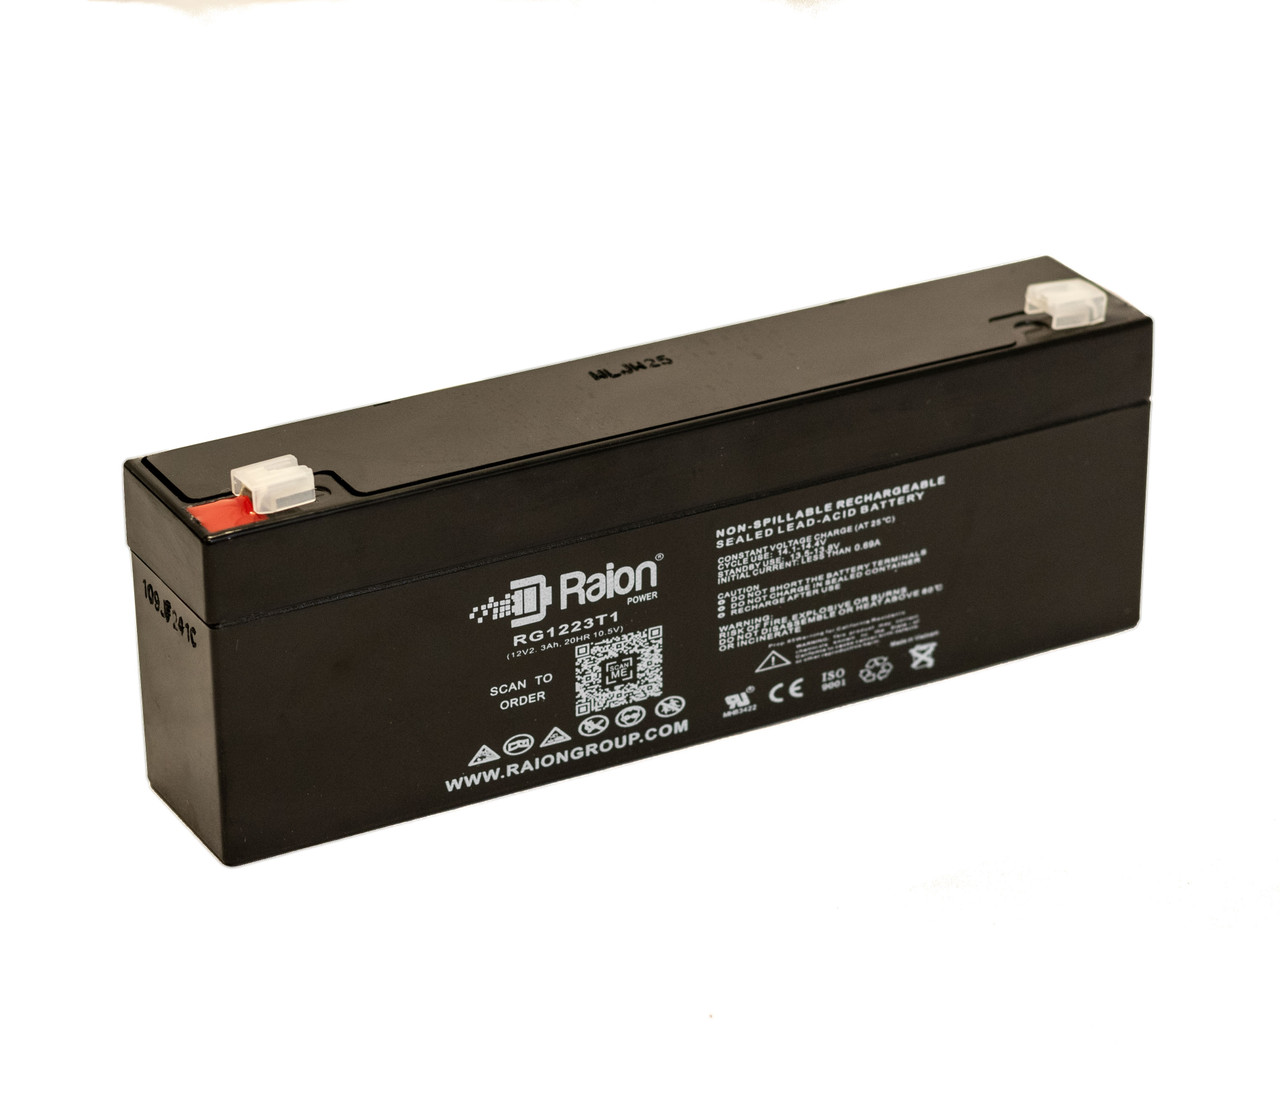 Raion Power RG1223T1 Replacement Battery for Weiboer GB12-2.2